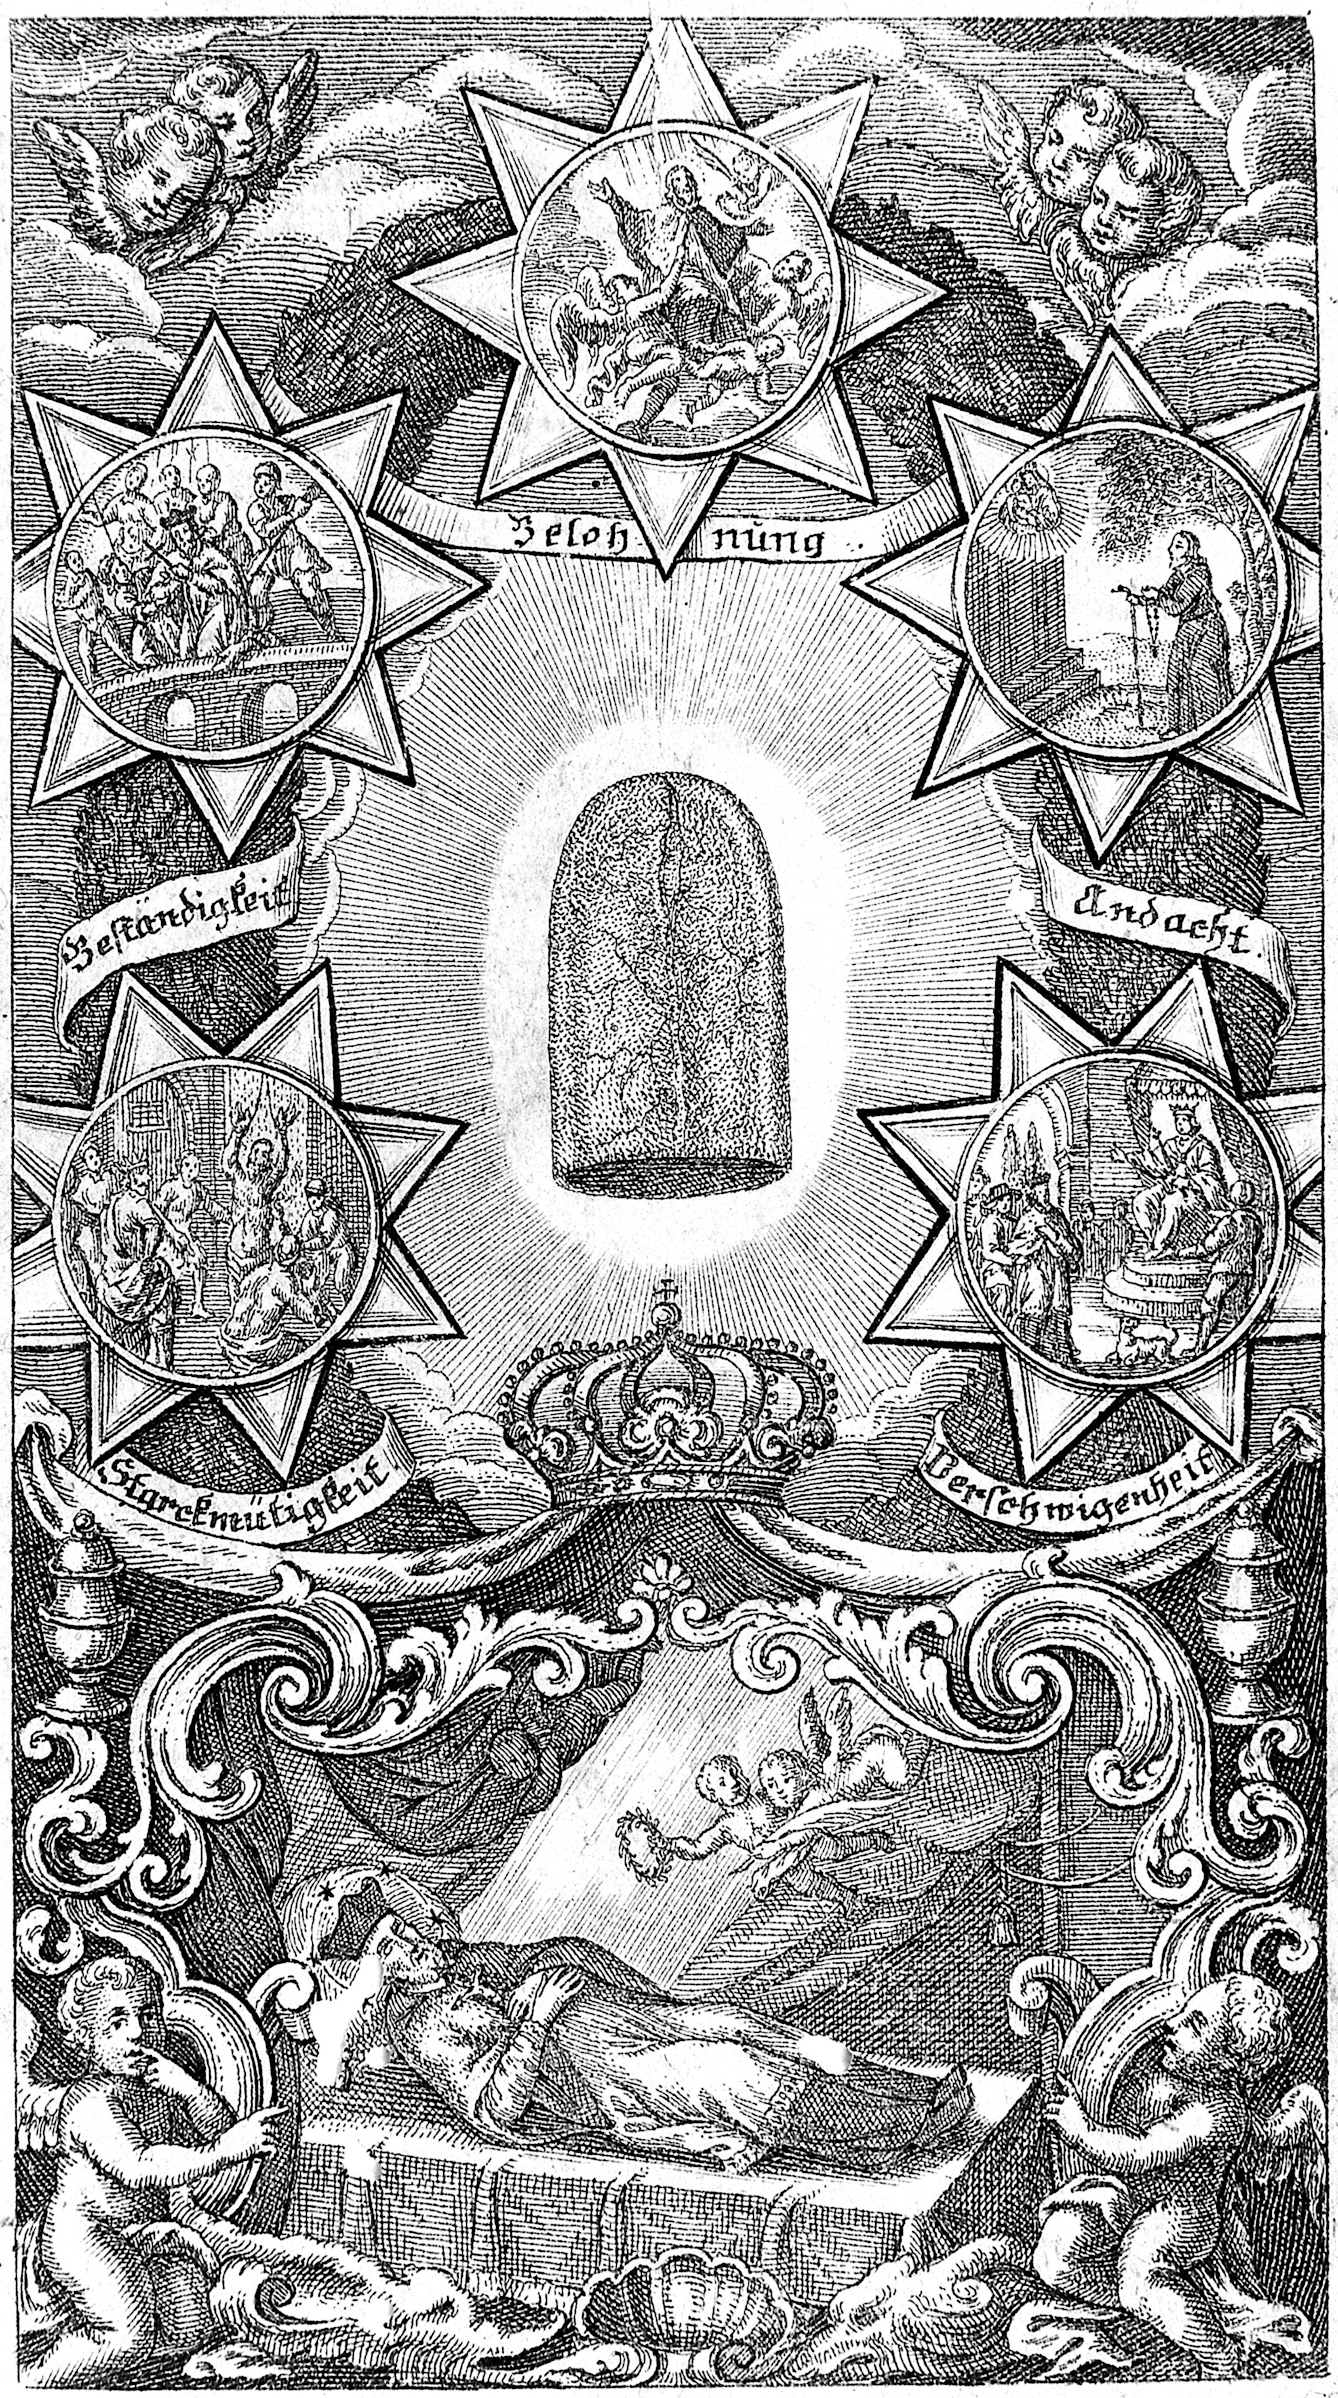 Etching of a disembodied tongue surrounded by stars with episodes from the life of St John Nepomuk. Translation of the lettering: devotion, secrecy, courage, faithfulness, reward. 